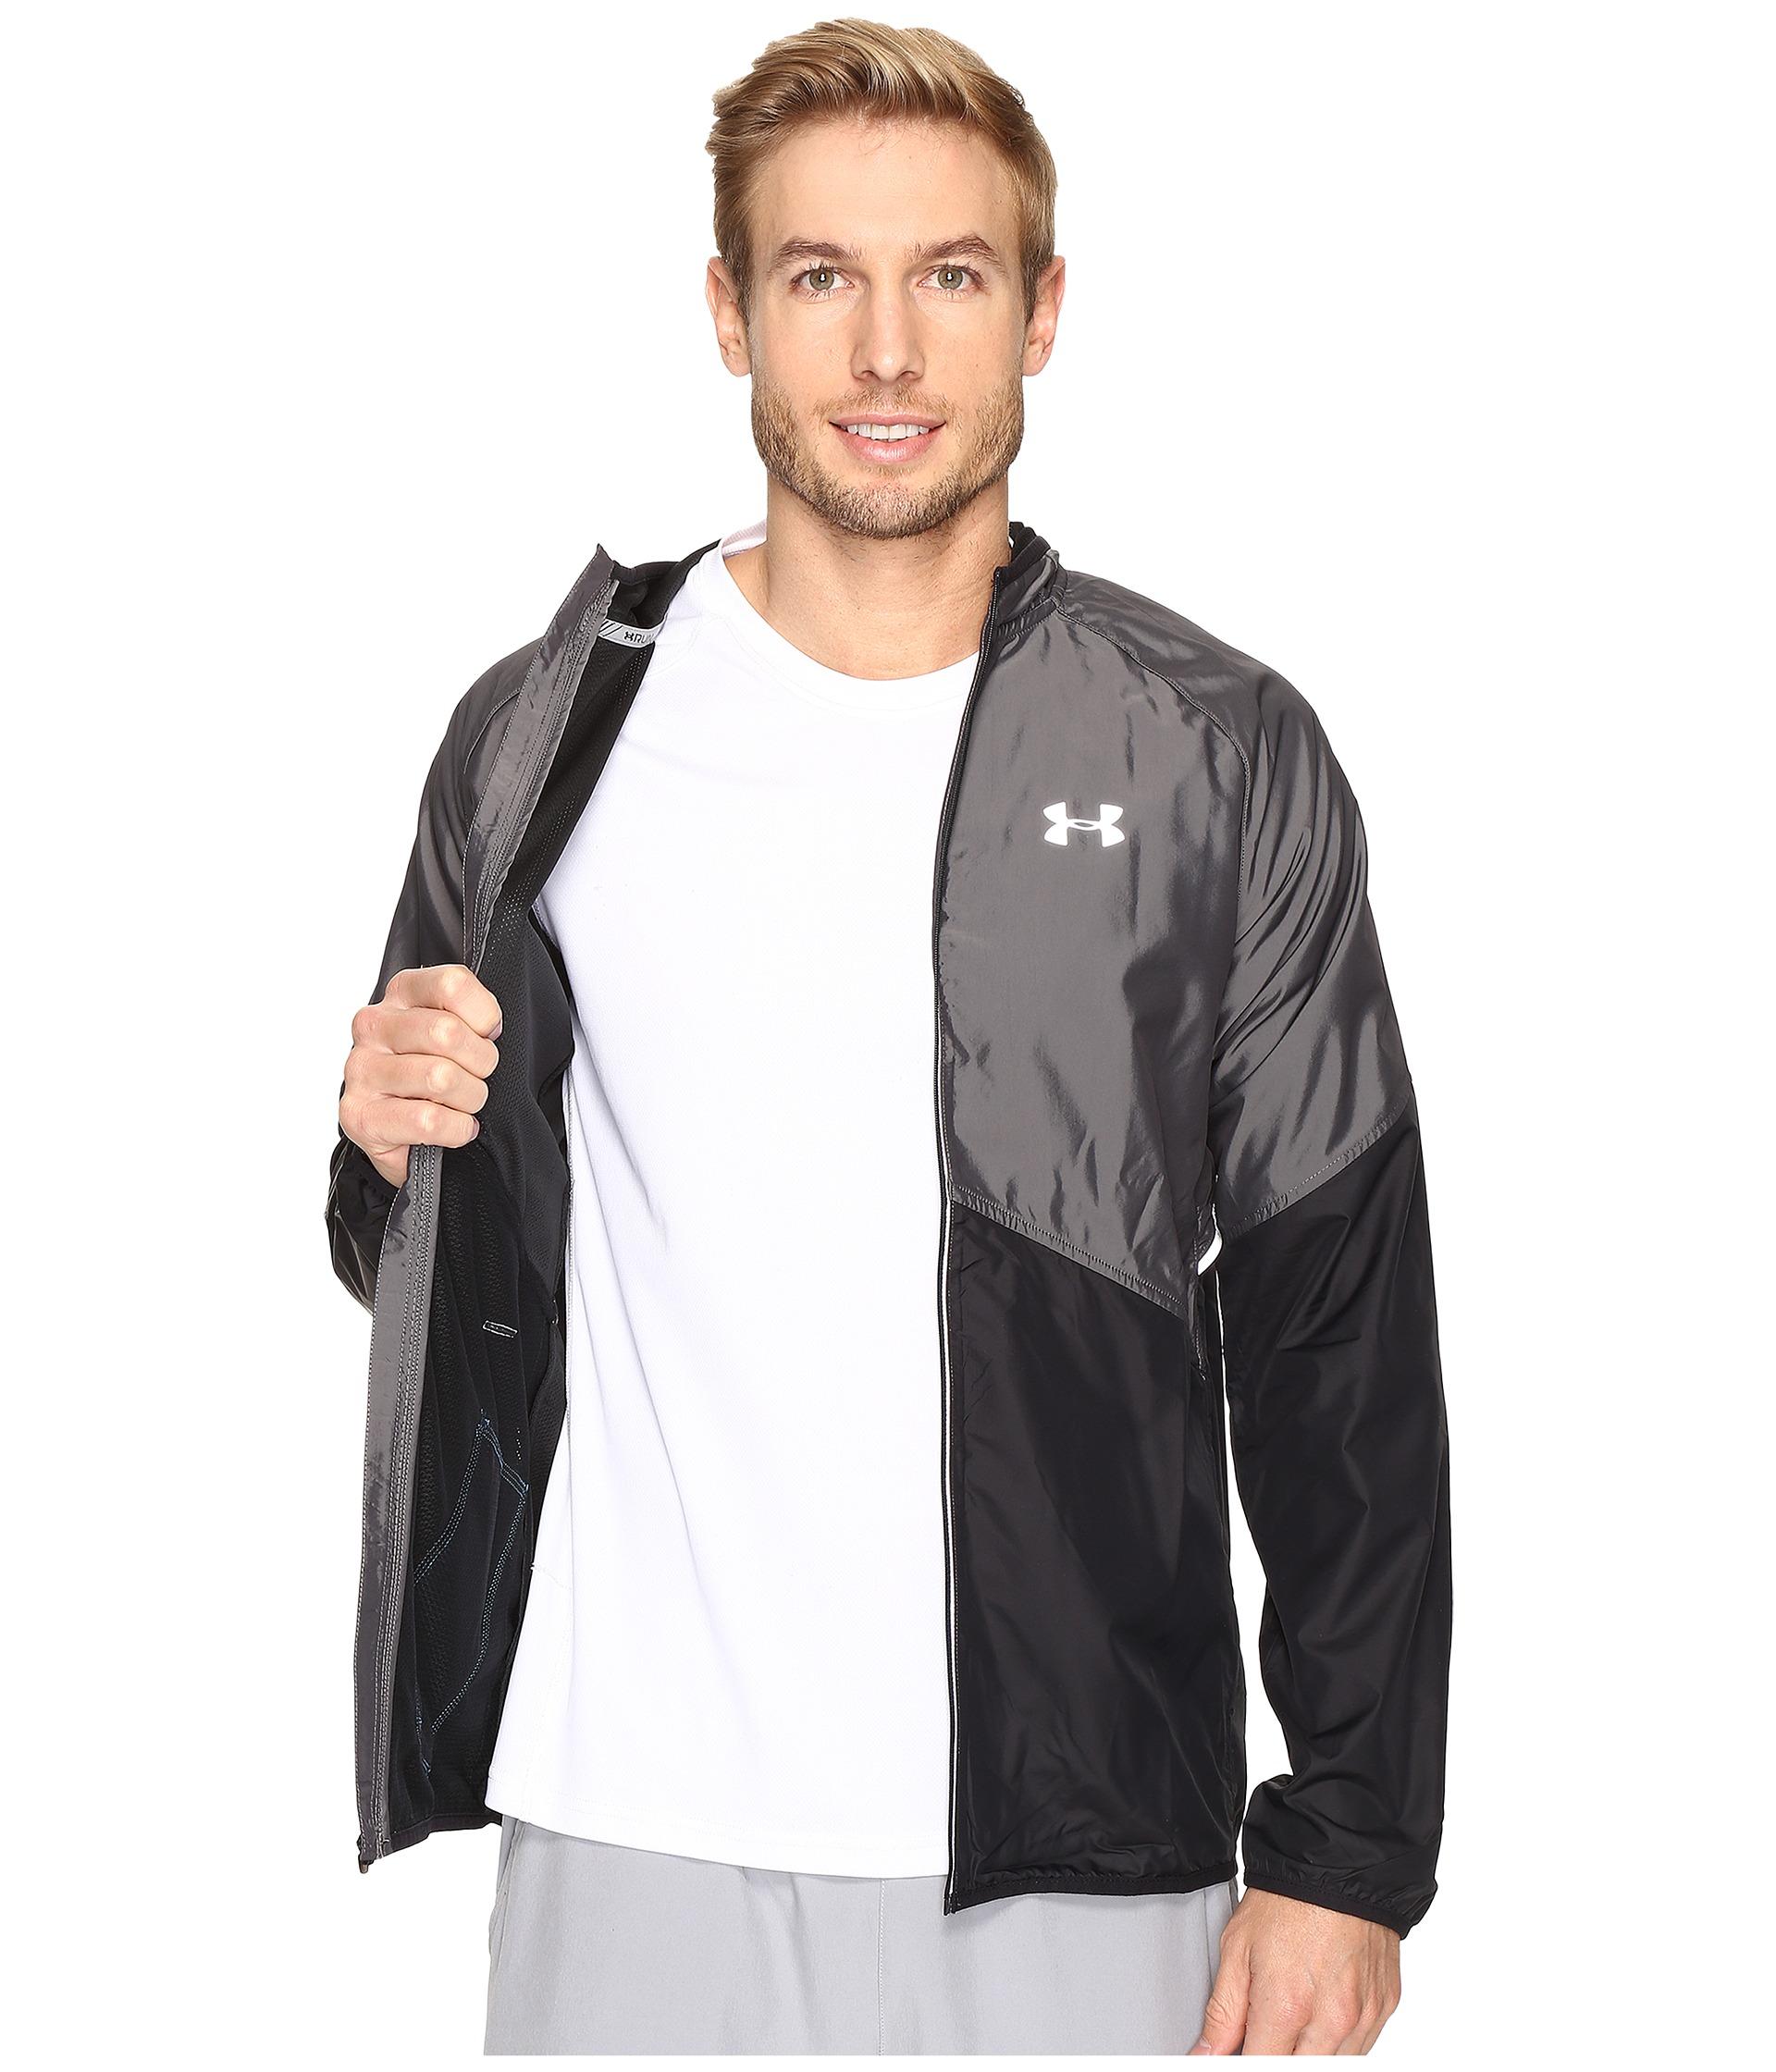 Under Armour Synthetic Nobreaks Storm 1 Jacket in Black for Men - Lyst